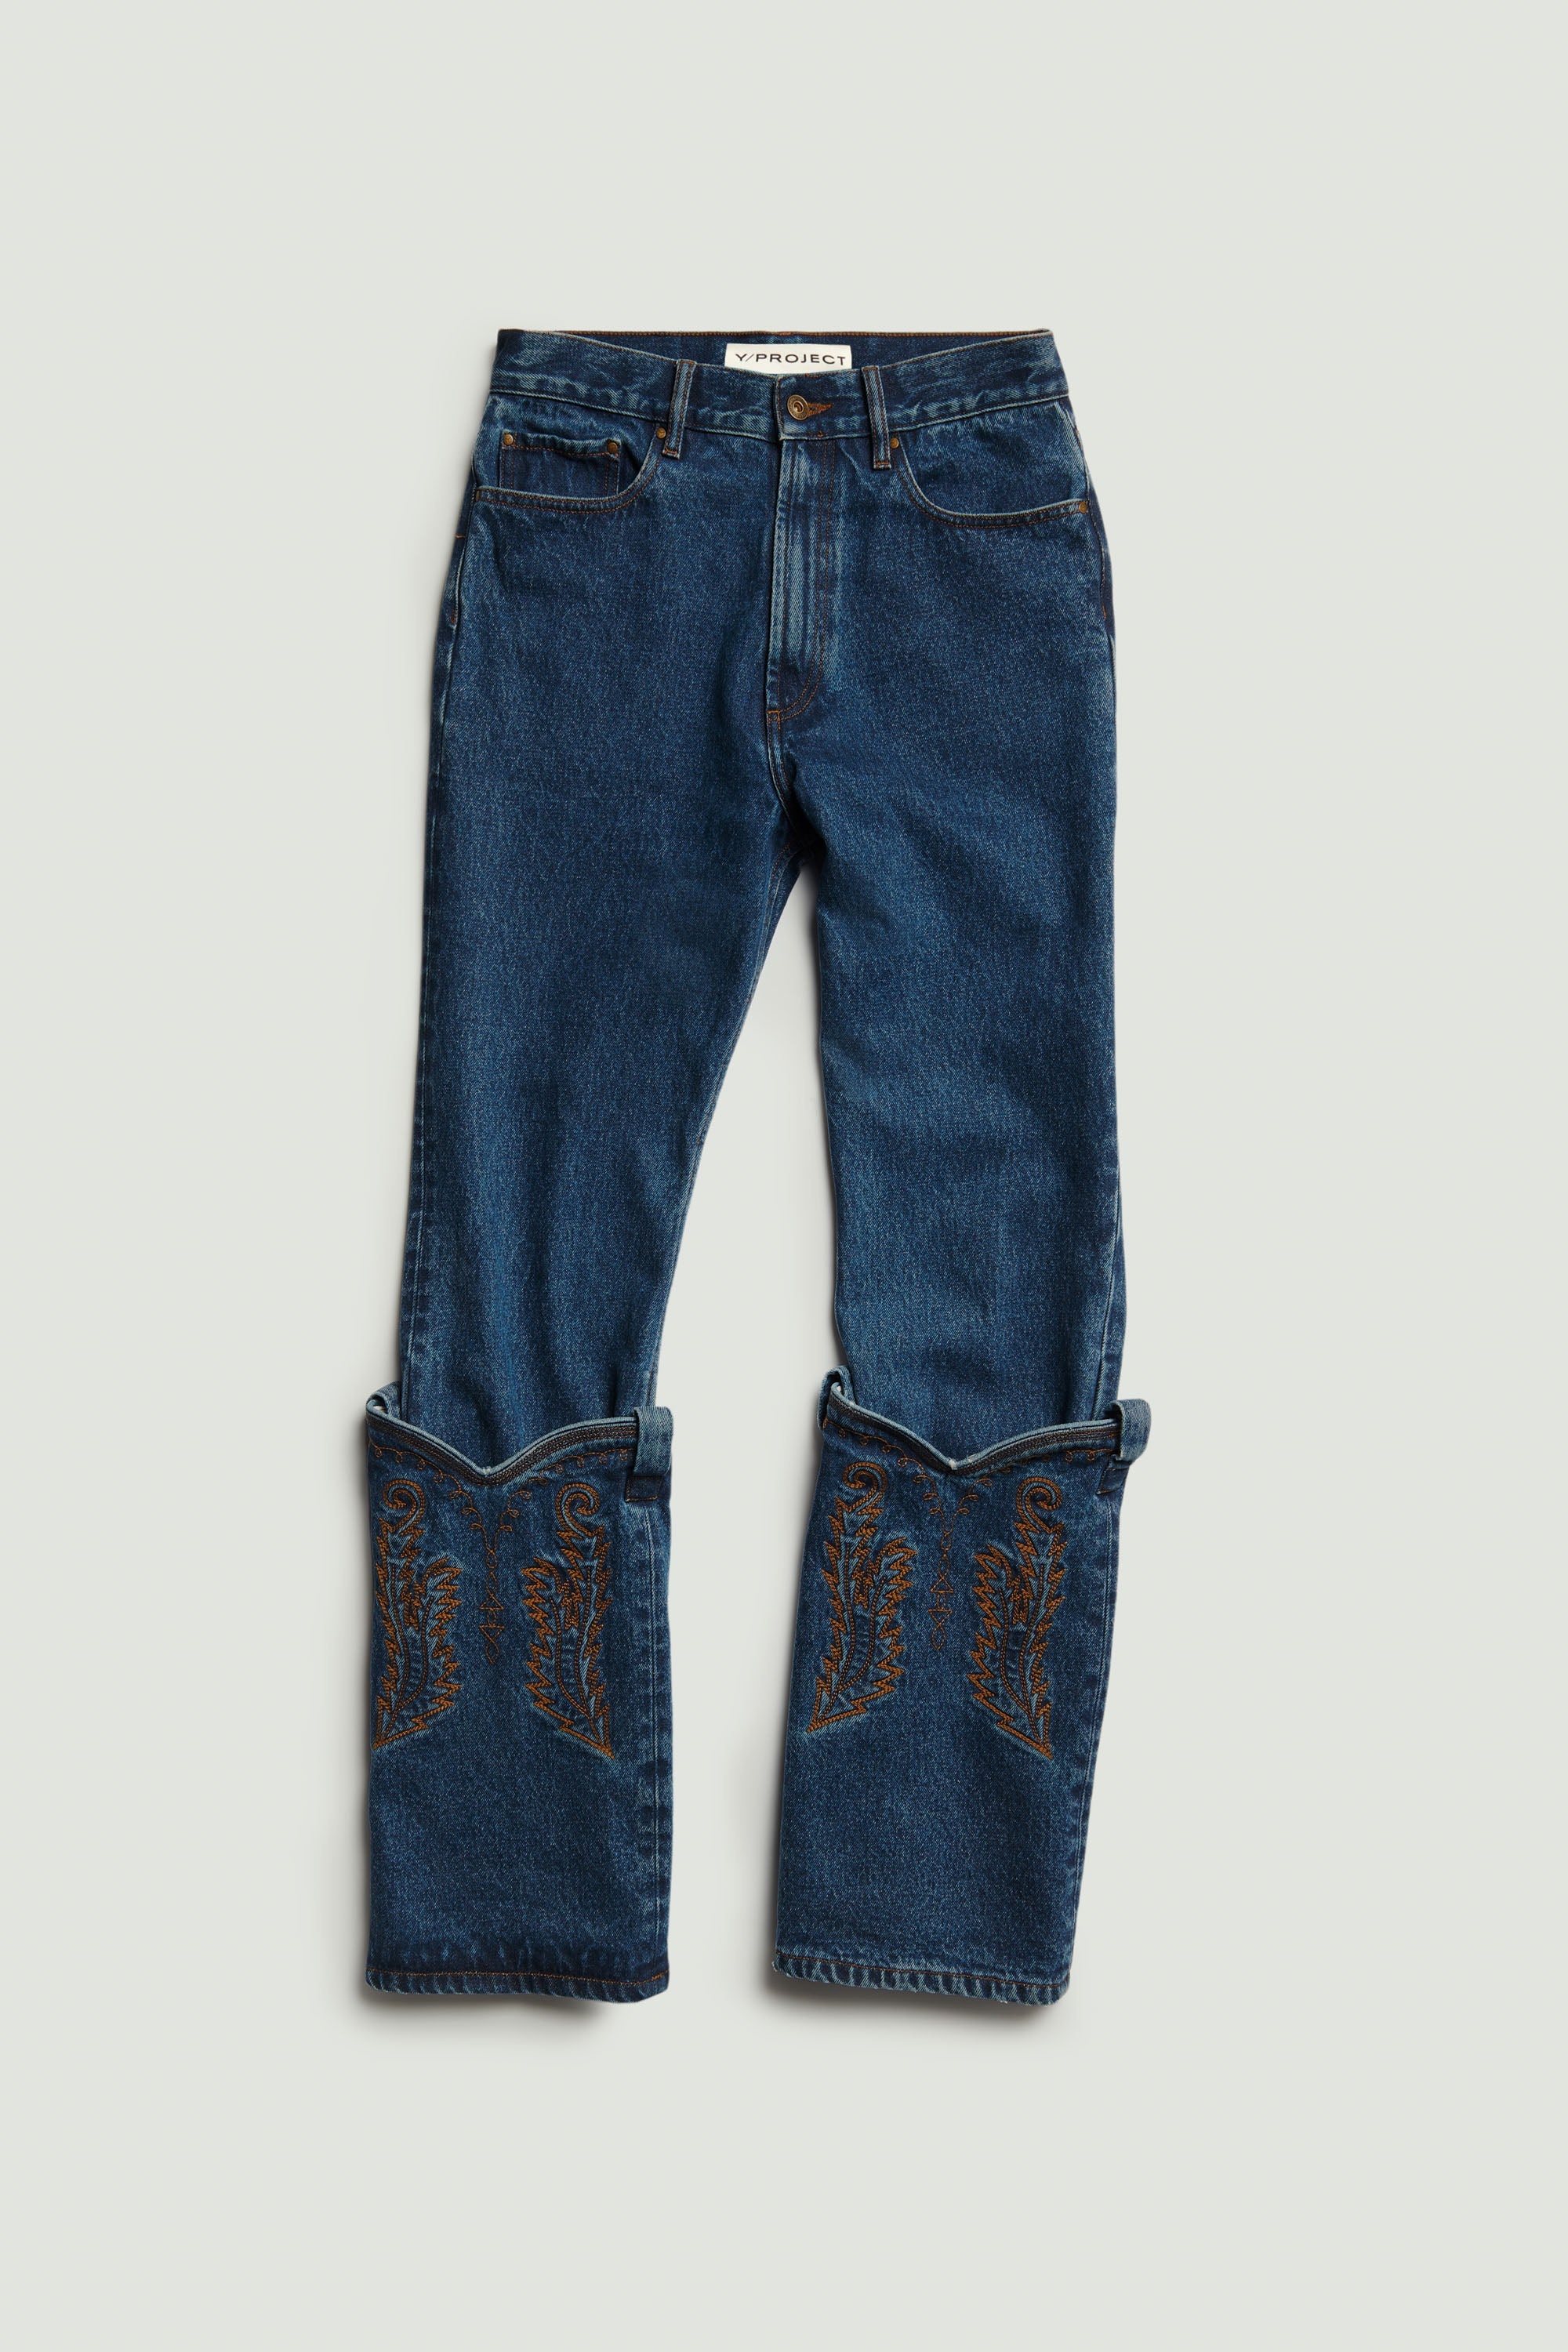 Y/Project Classic Cowboy Cuff Jeans | REVERSIBLE